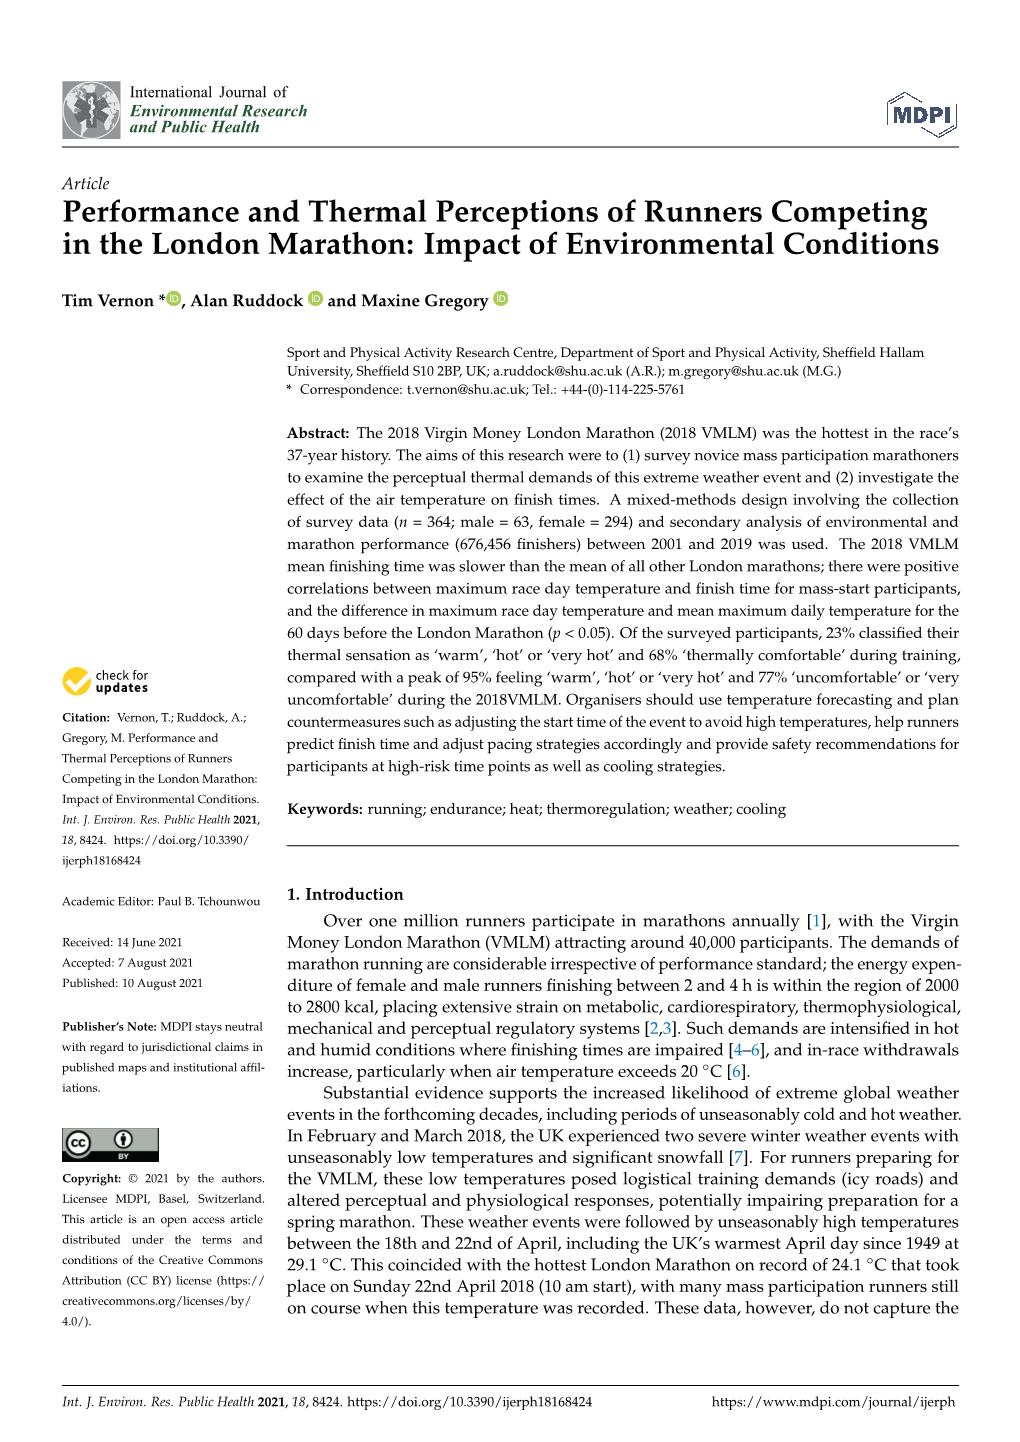 Performance and Thermal Perceptions of Runners Competing in the London Marathon: Impact of Environmental Conditions